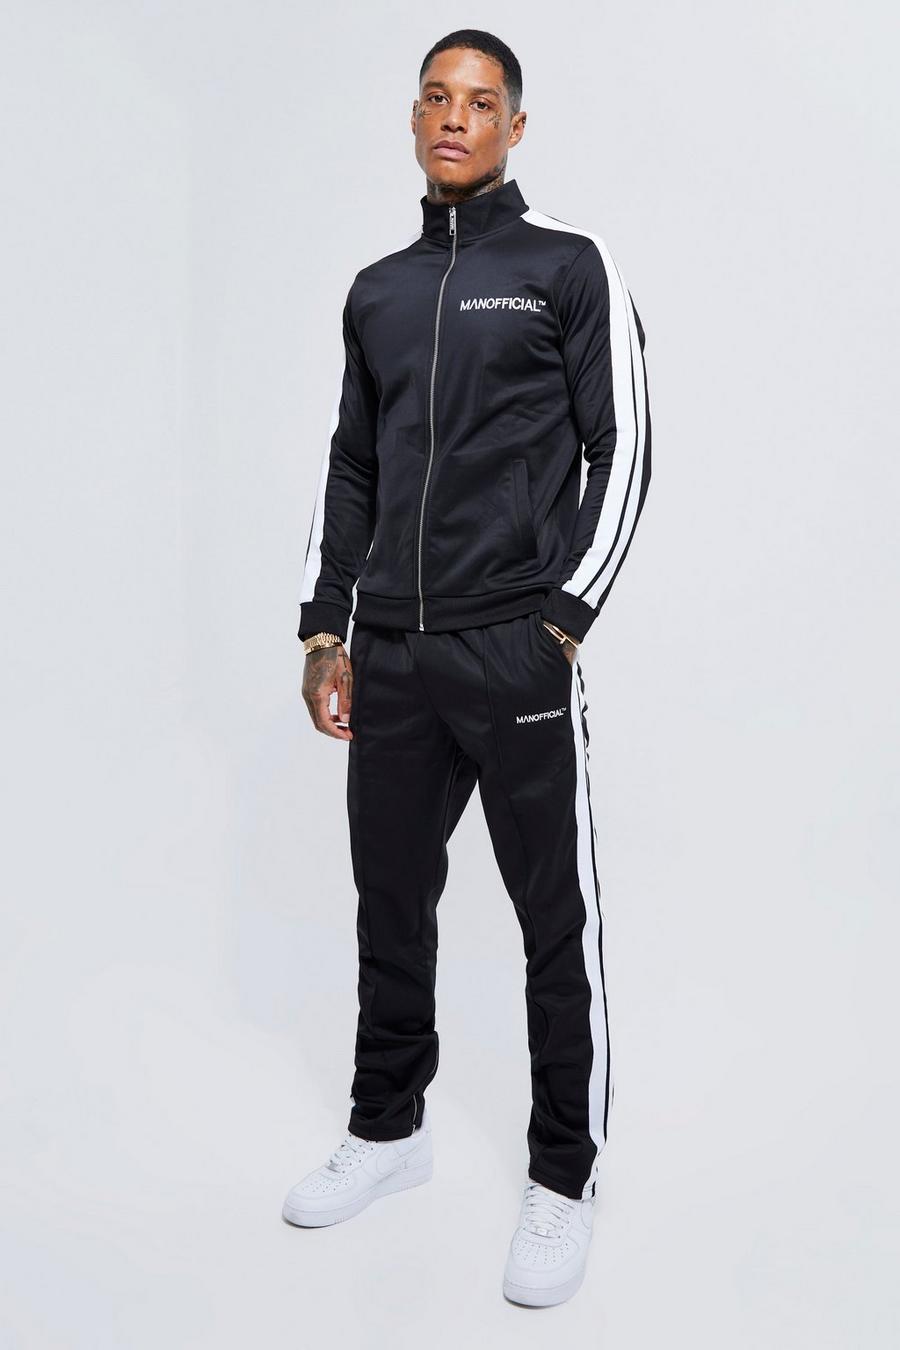 Man Official Tricot Funnel Neck Tracksuit | boohoo